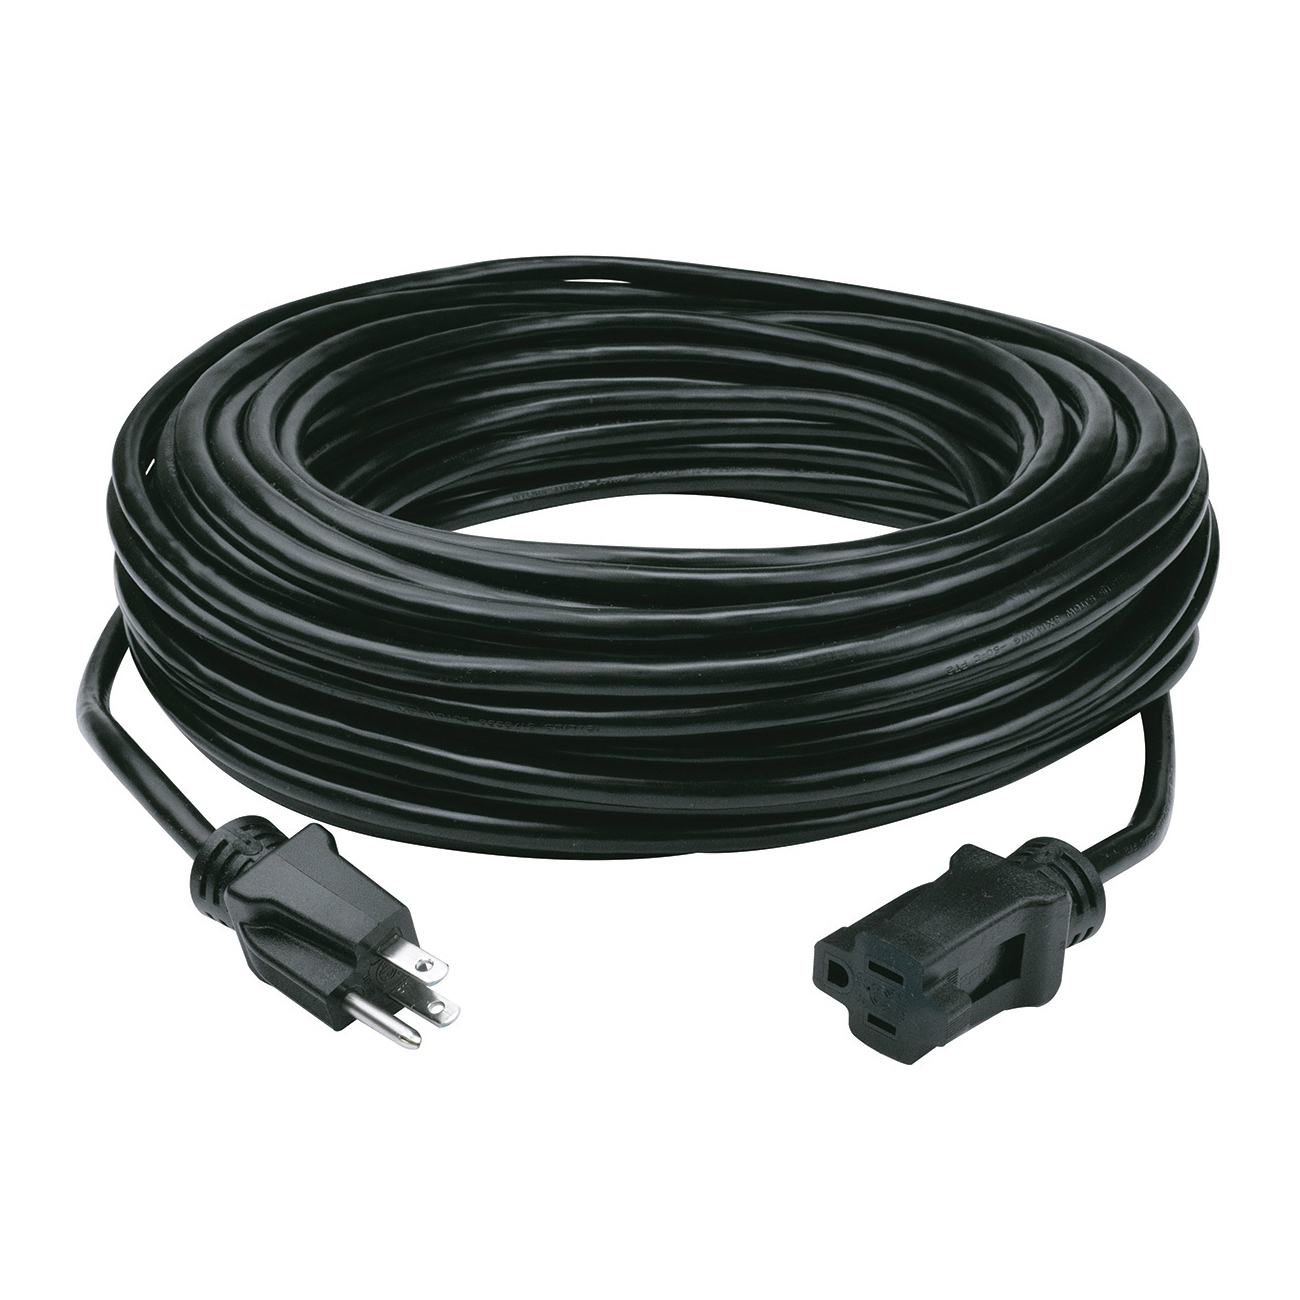 PowerZone OR532735 Extension Cord, 100 ft L, Black